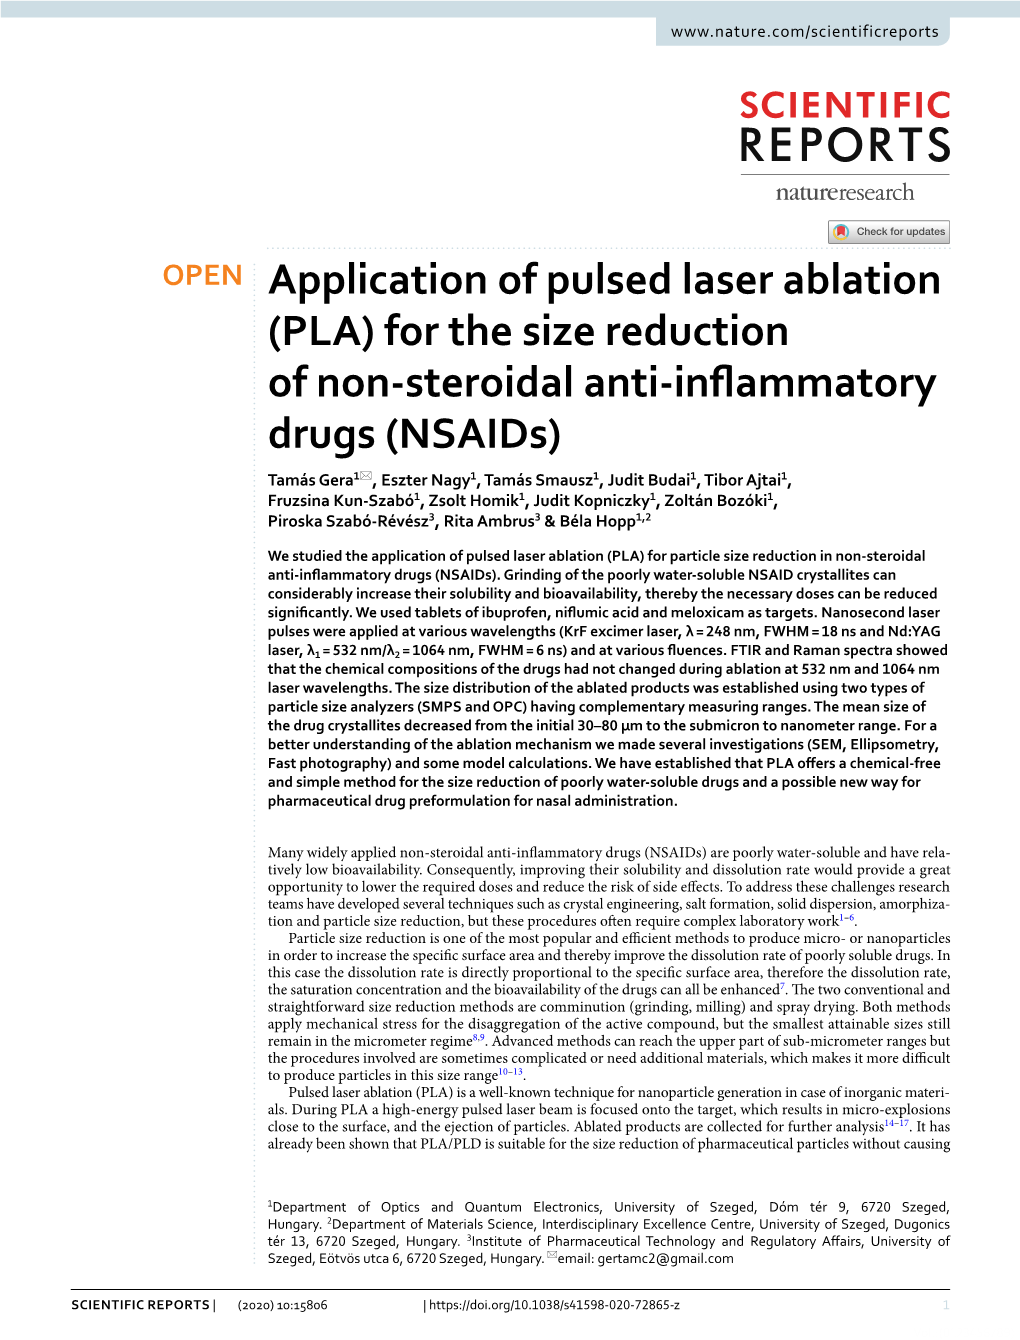 Application of Pulsed Laser Ablation